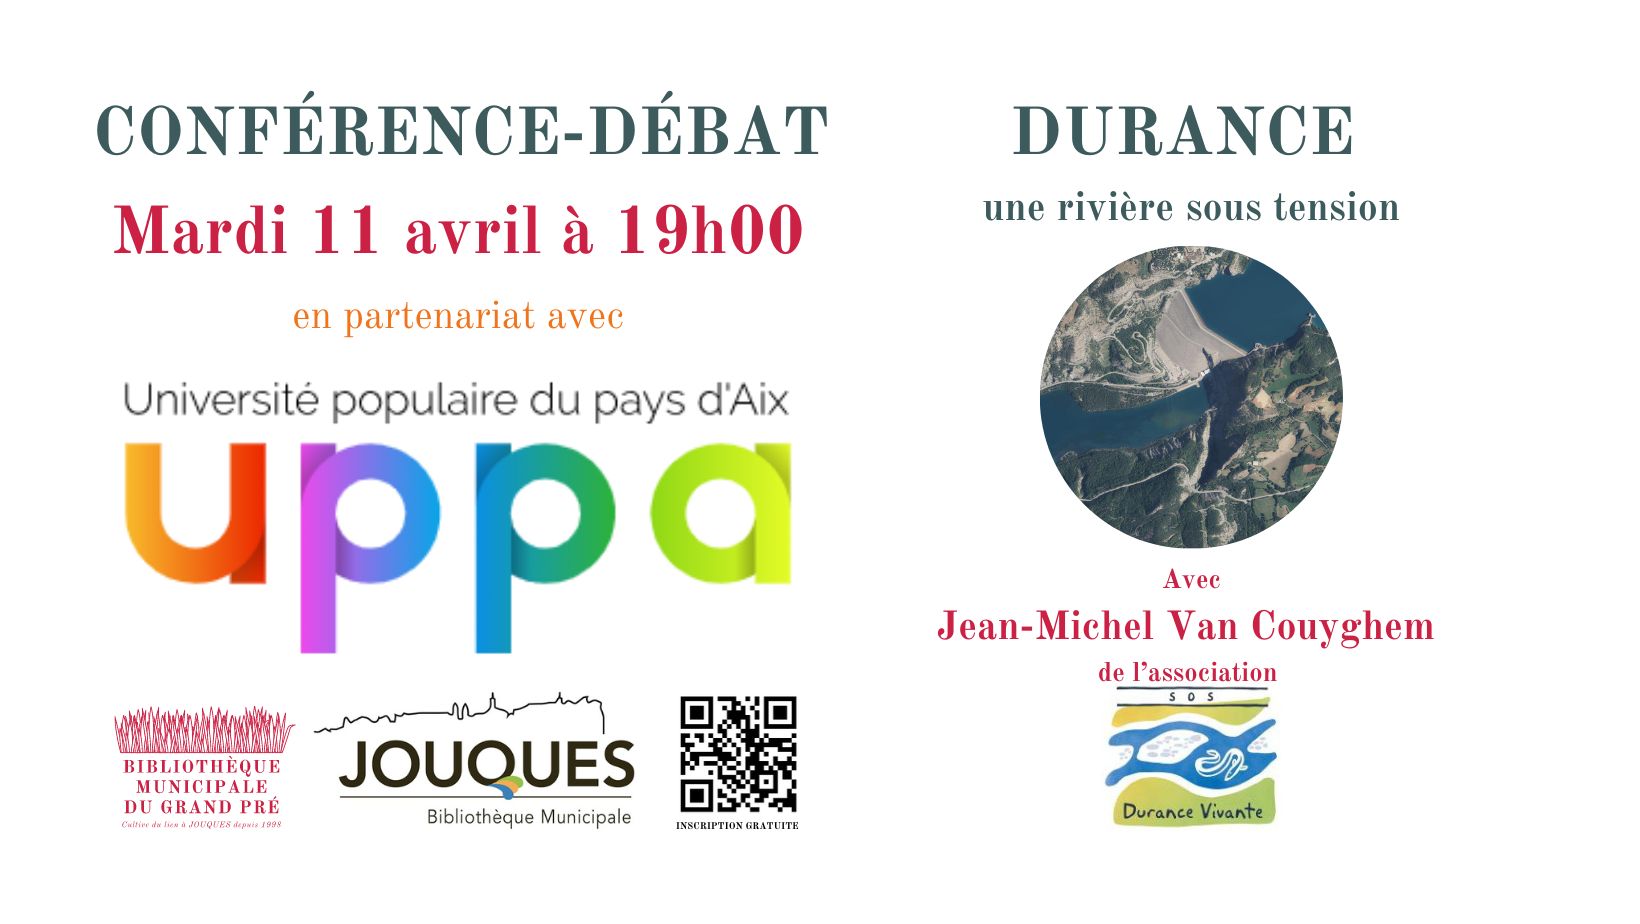 Confrence Durance